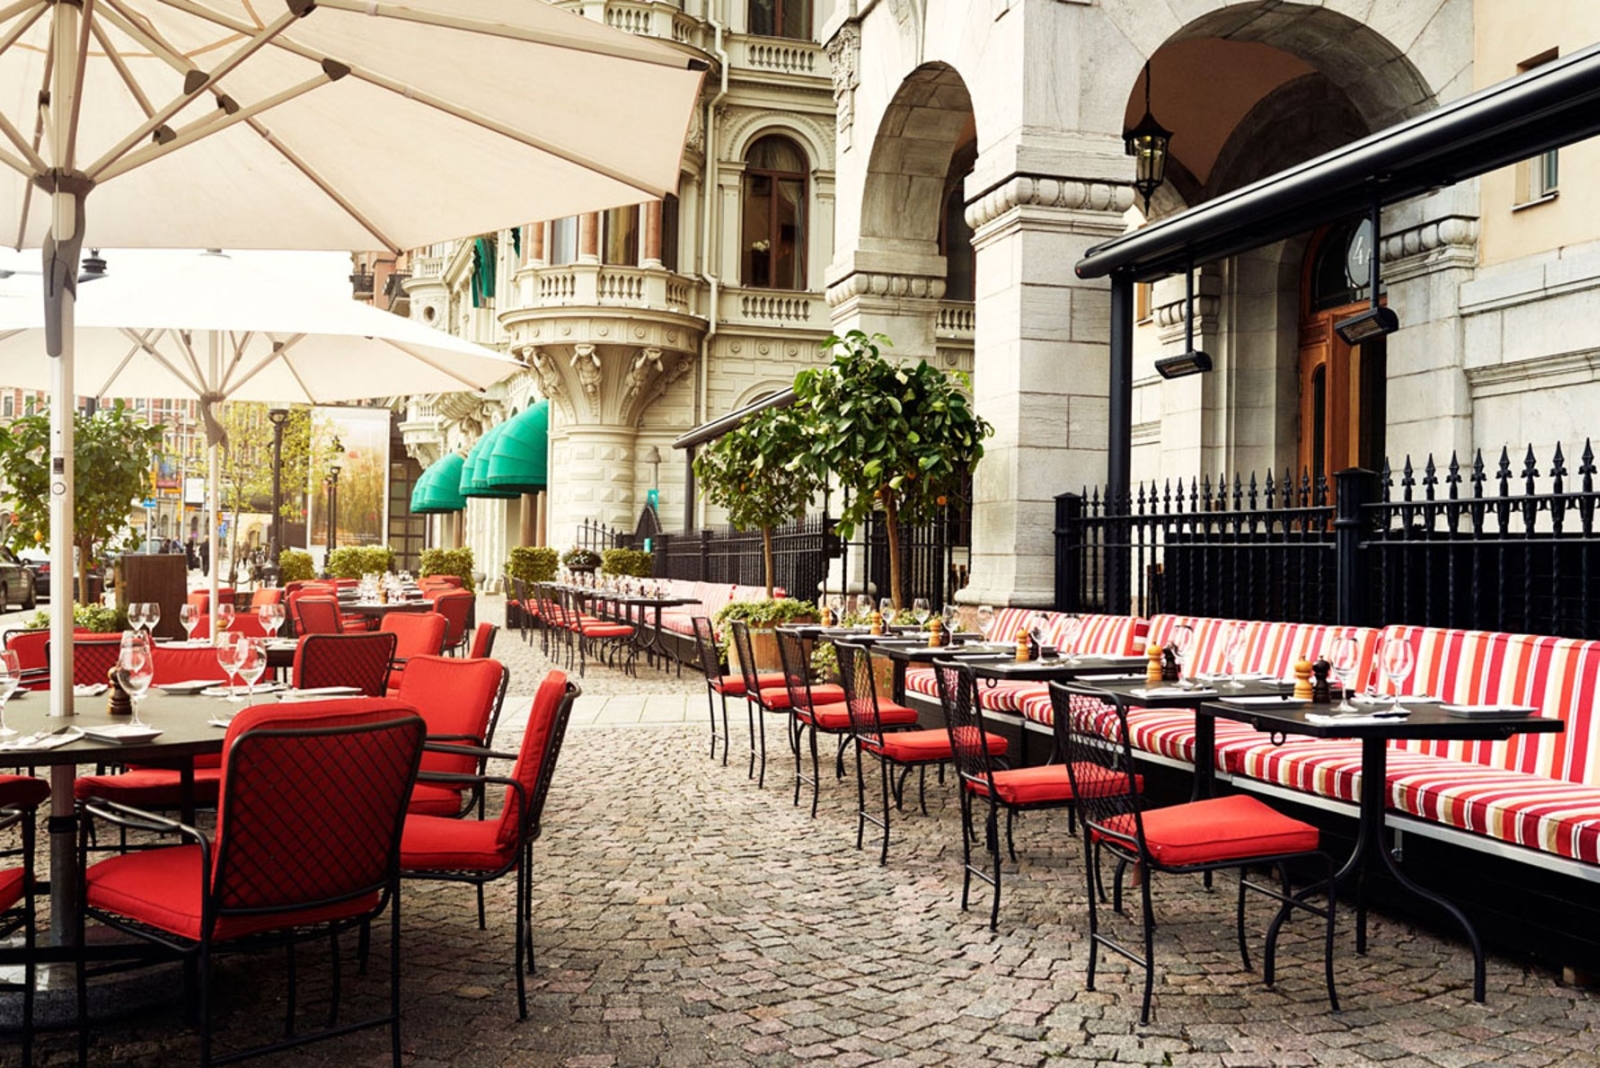 Outdoor seating on a cobbled square with parasols